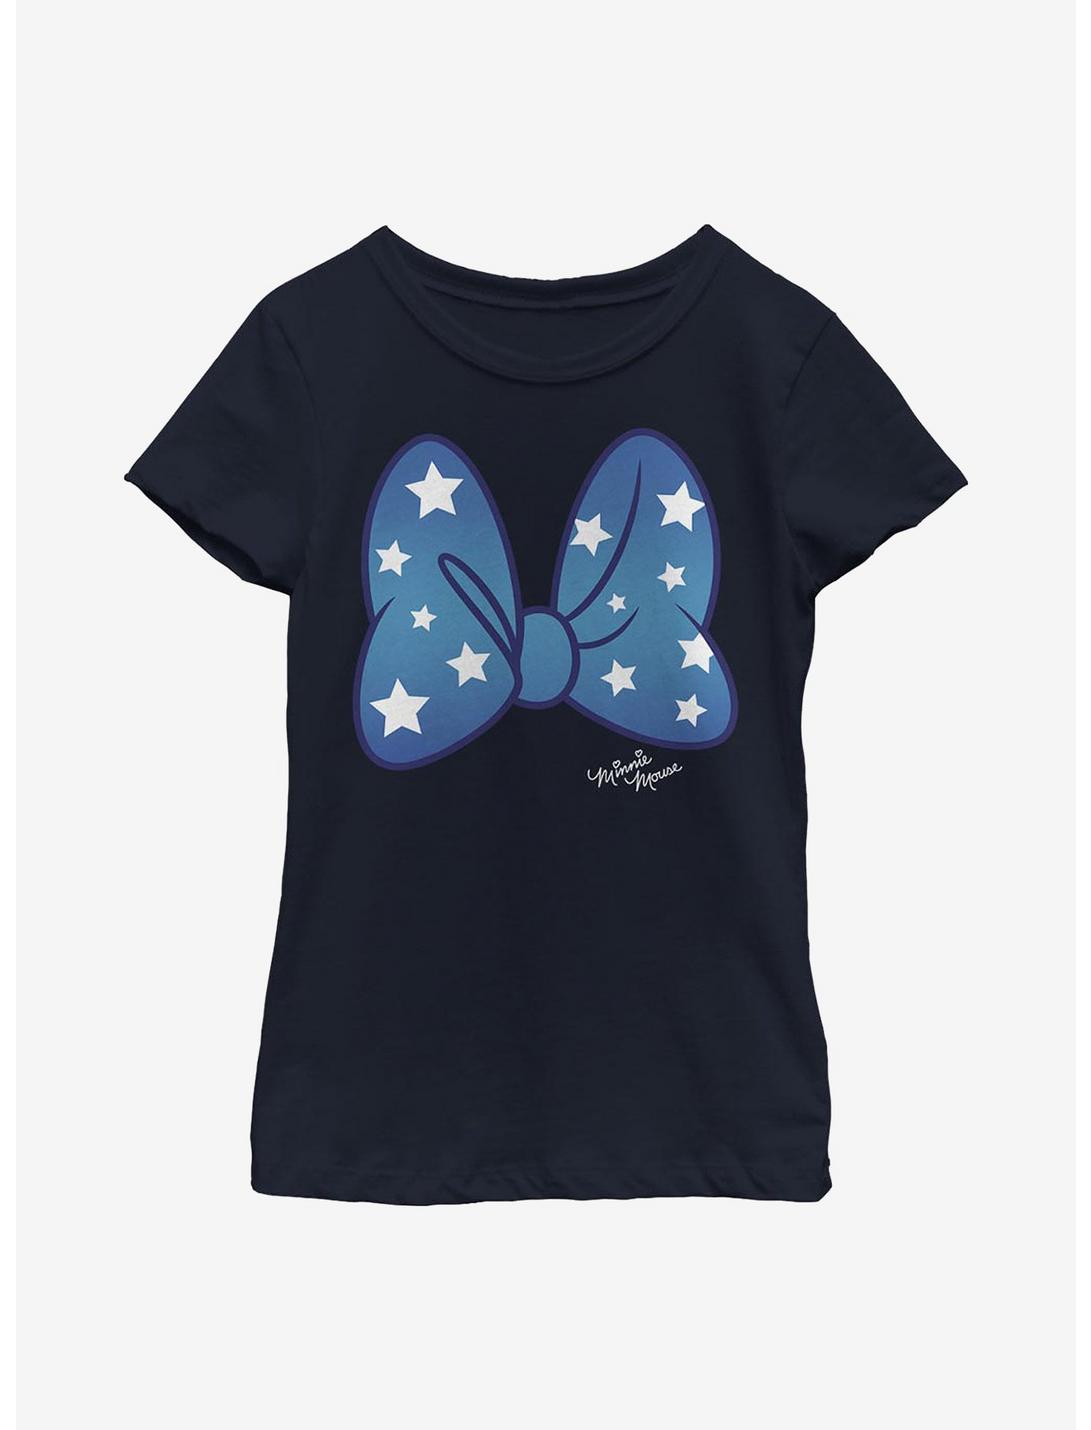 Disney Minnie Mouse Stars Bow Youth Girls T-Shirt, NAVY, hi-res